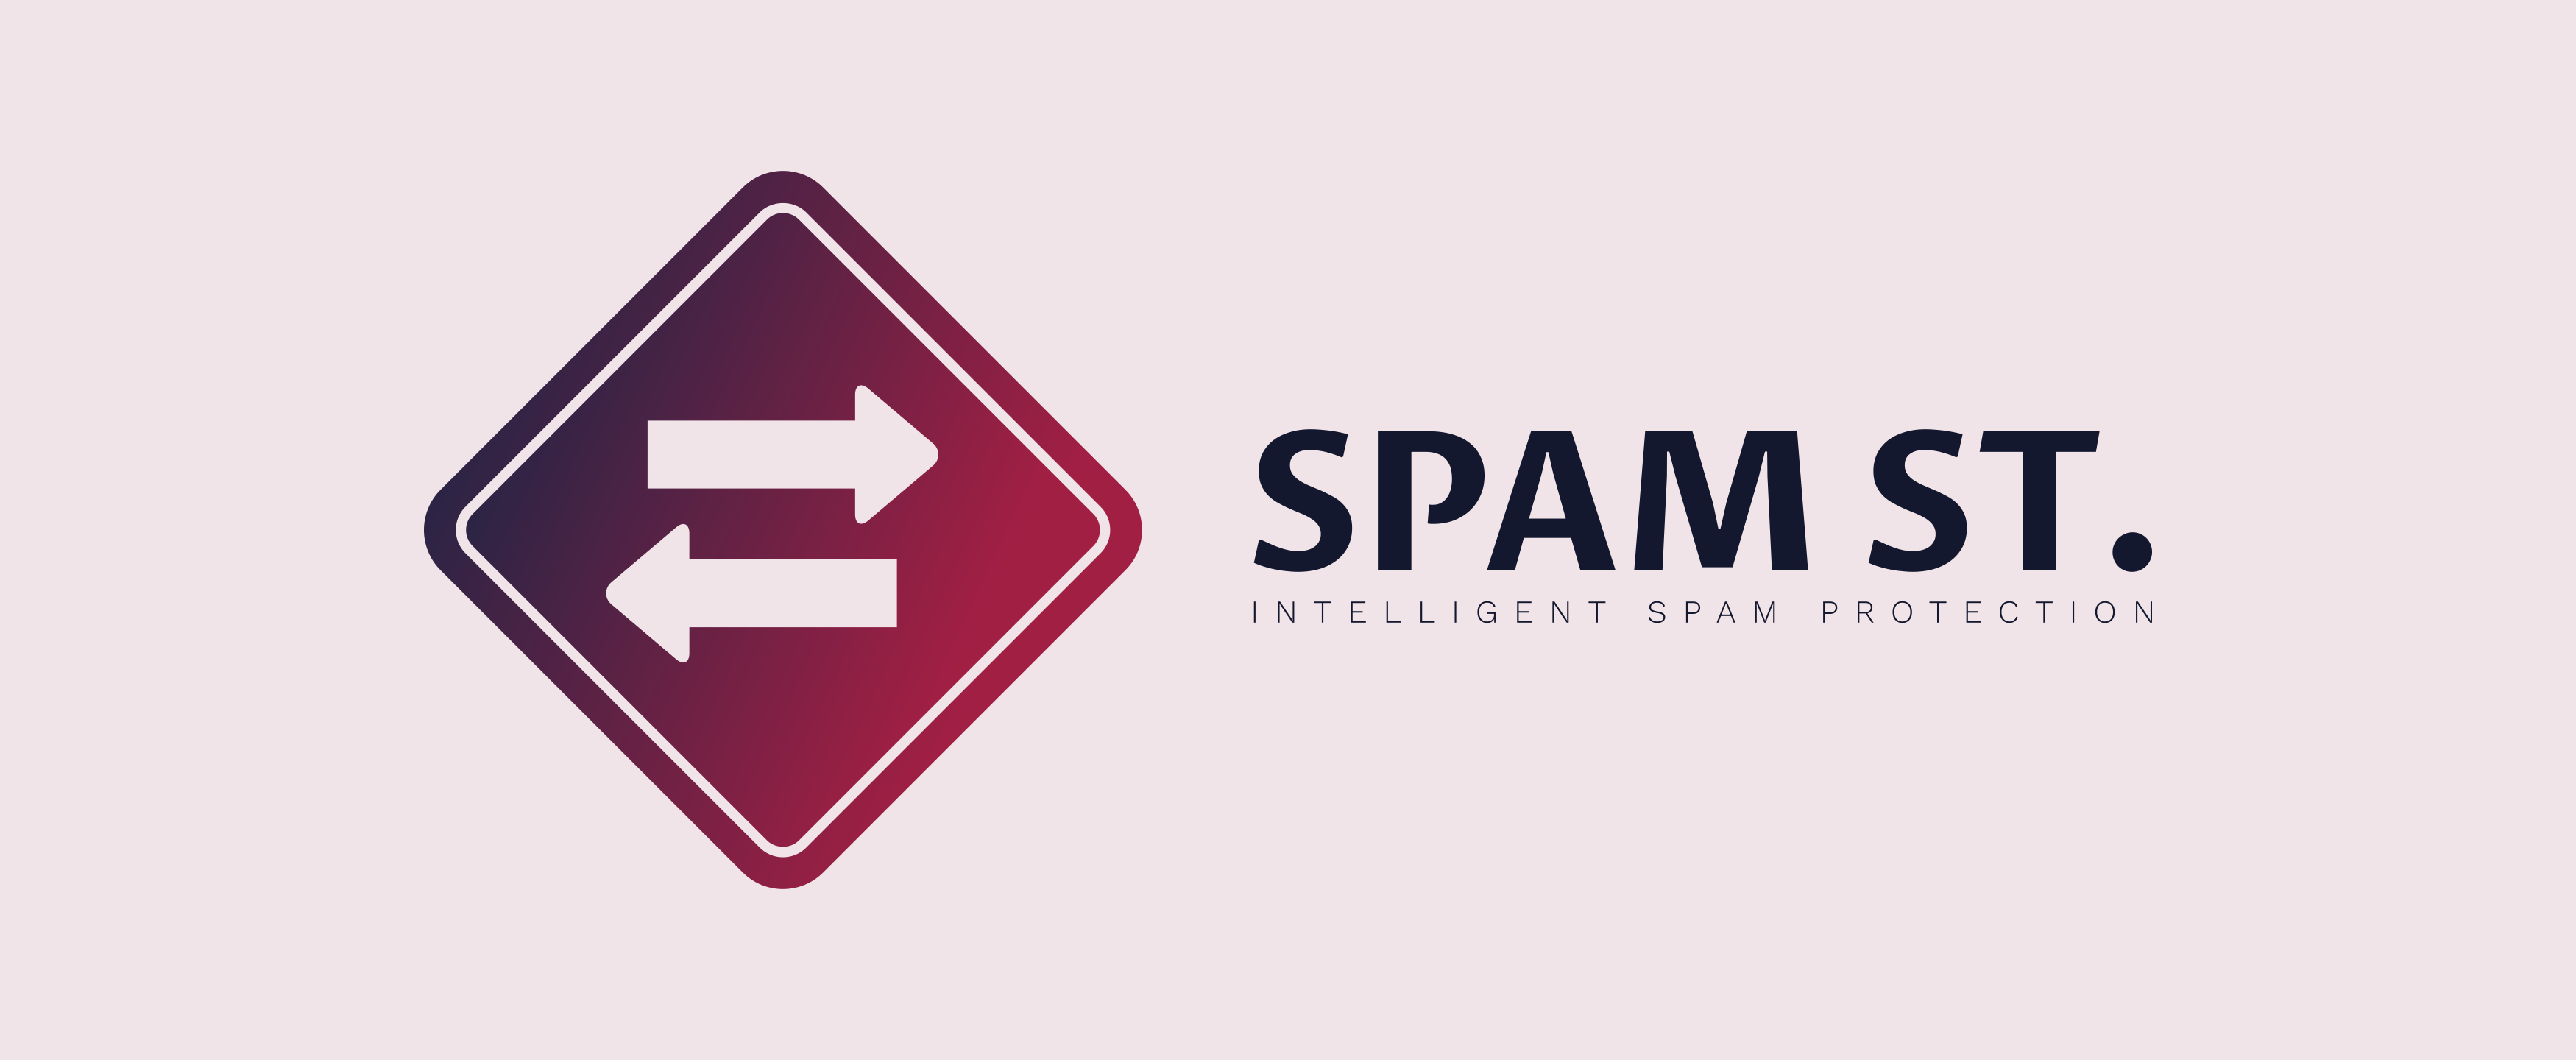 Spam St